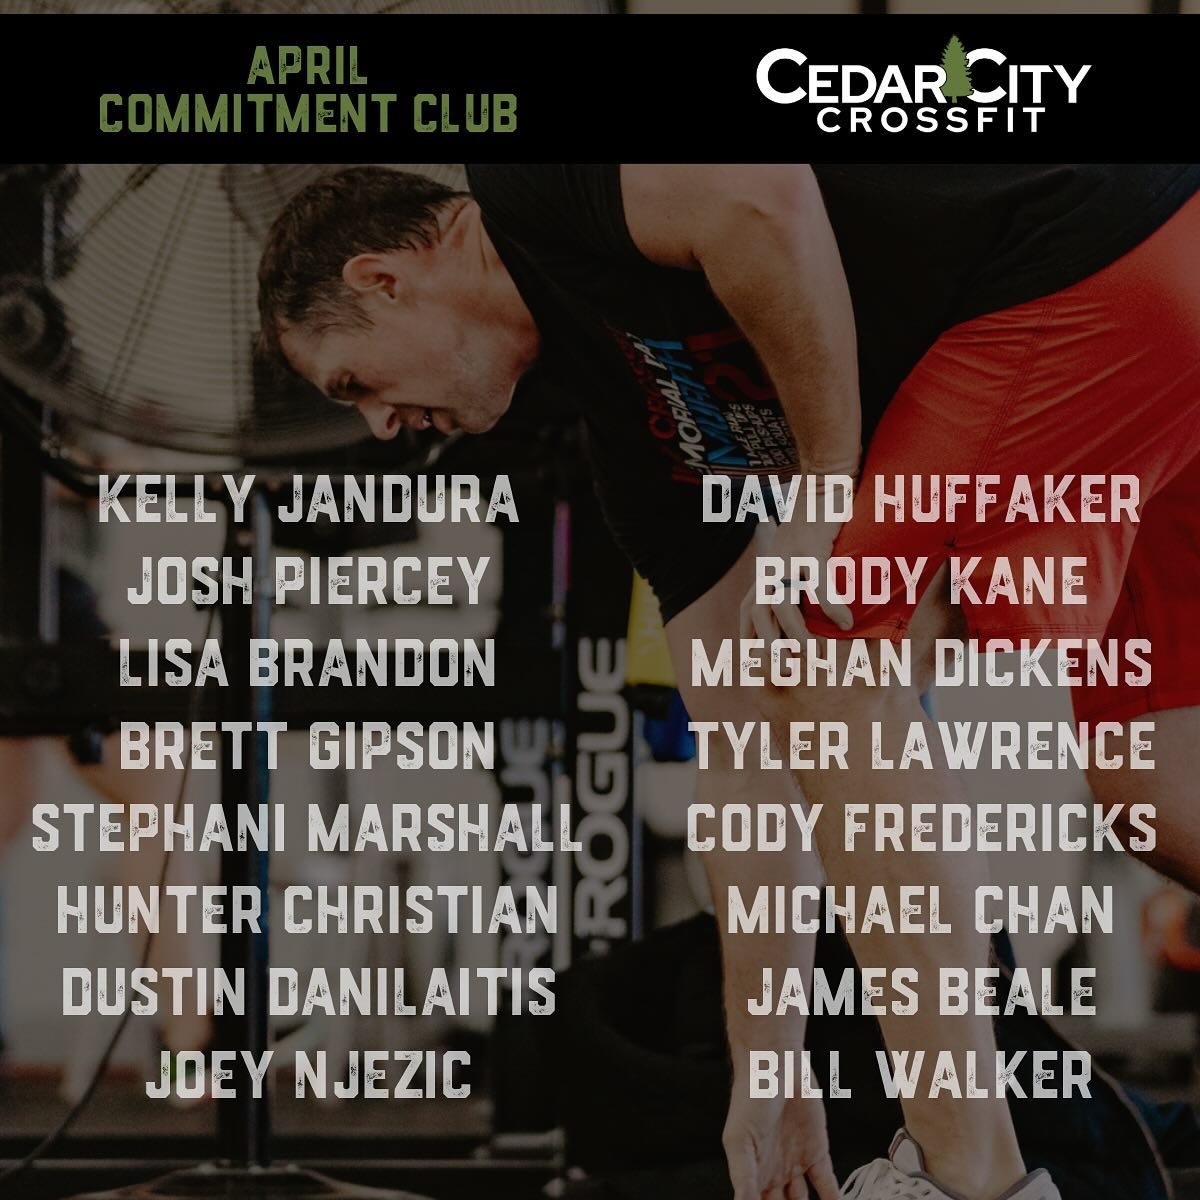 Congrats to our athletes who made the April Commitment Club! Let&rsquo;s get May off to a good start and get in the gym consistently!